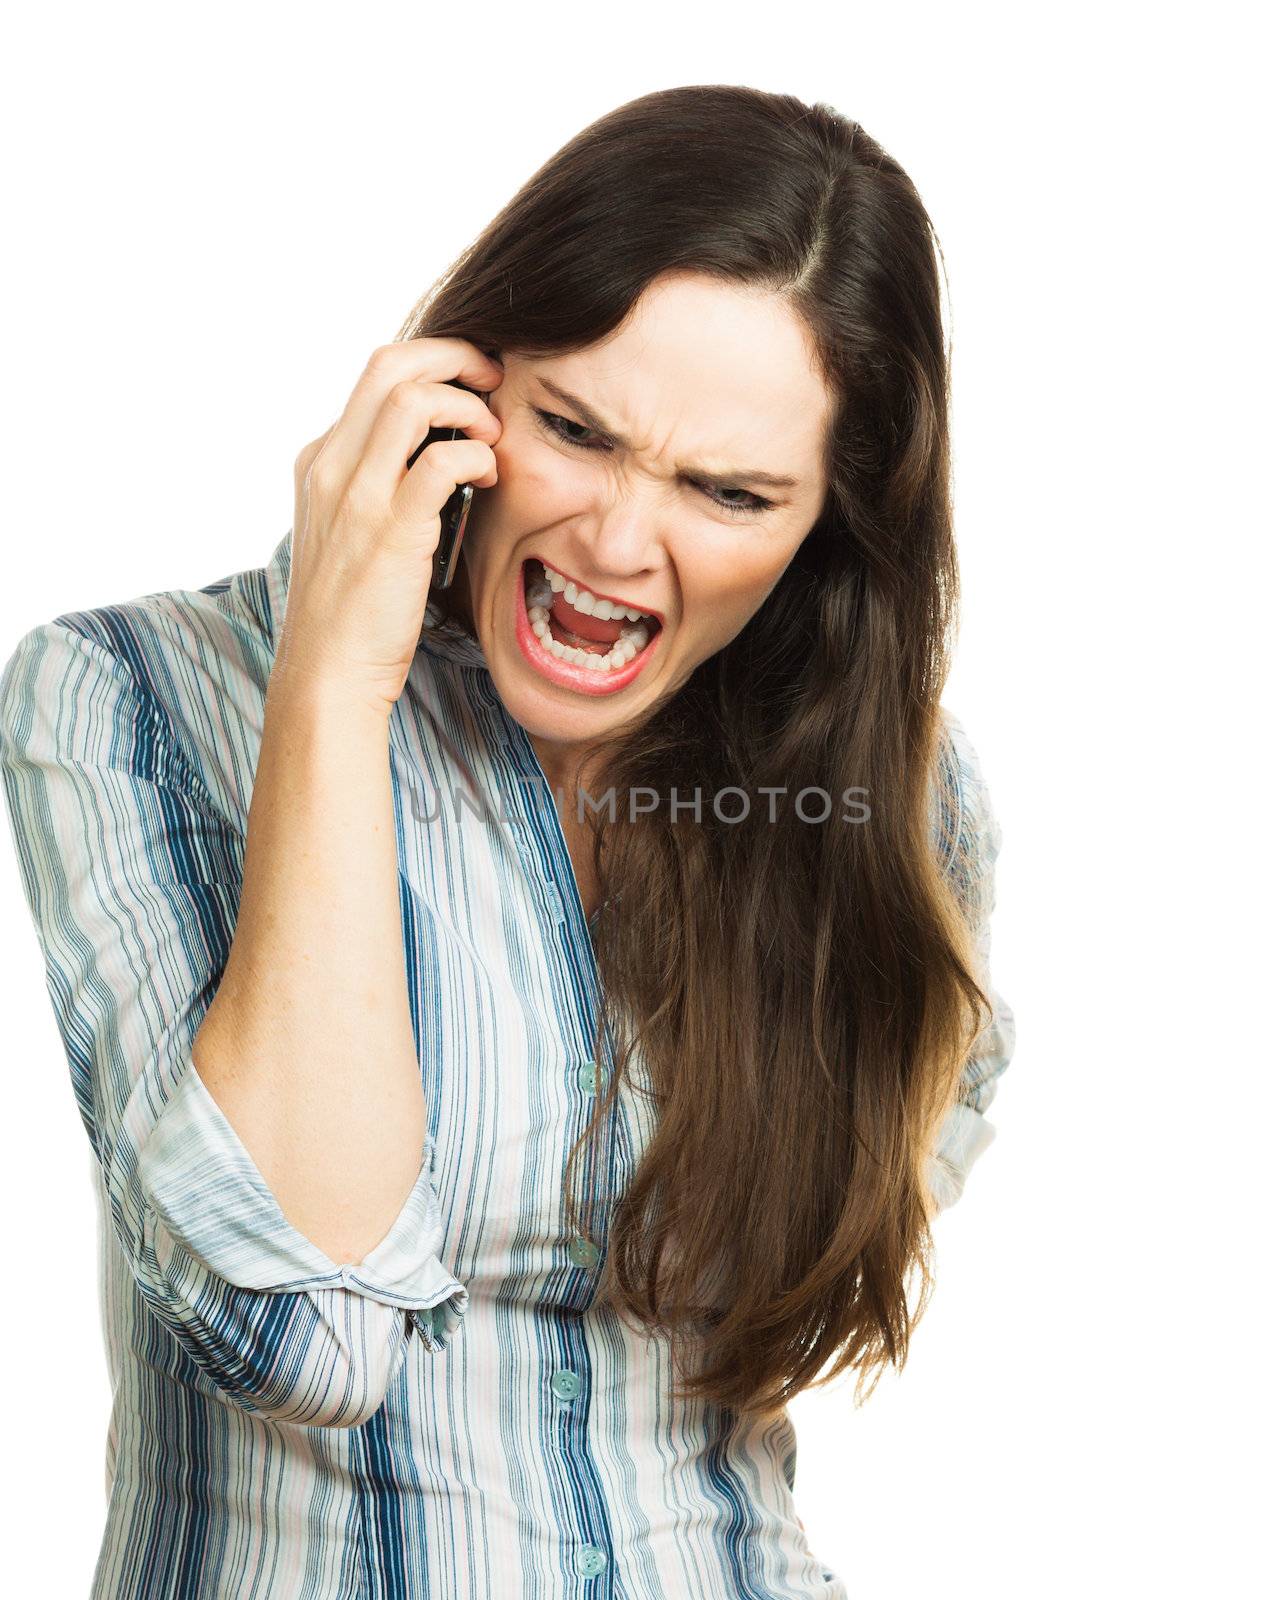 An angry and very frustrated business woman yelling on the phone. Isolated over white.